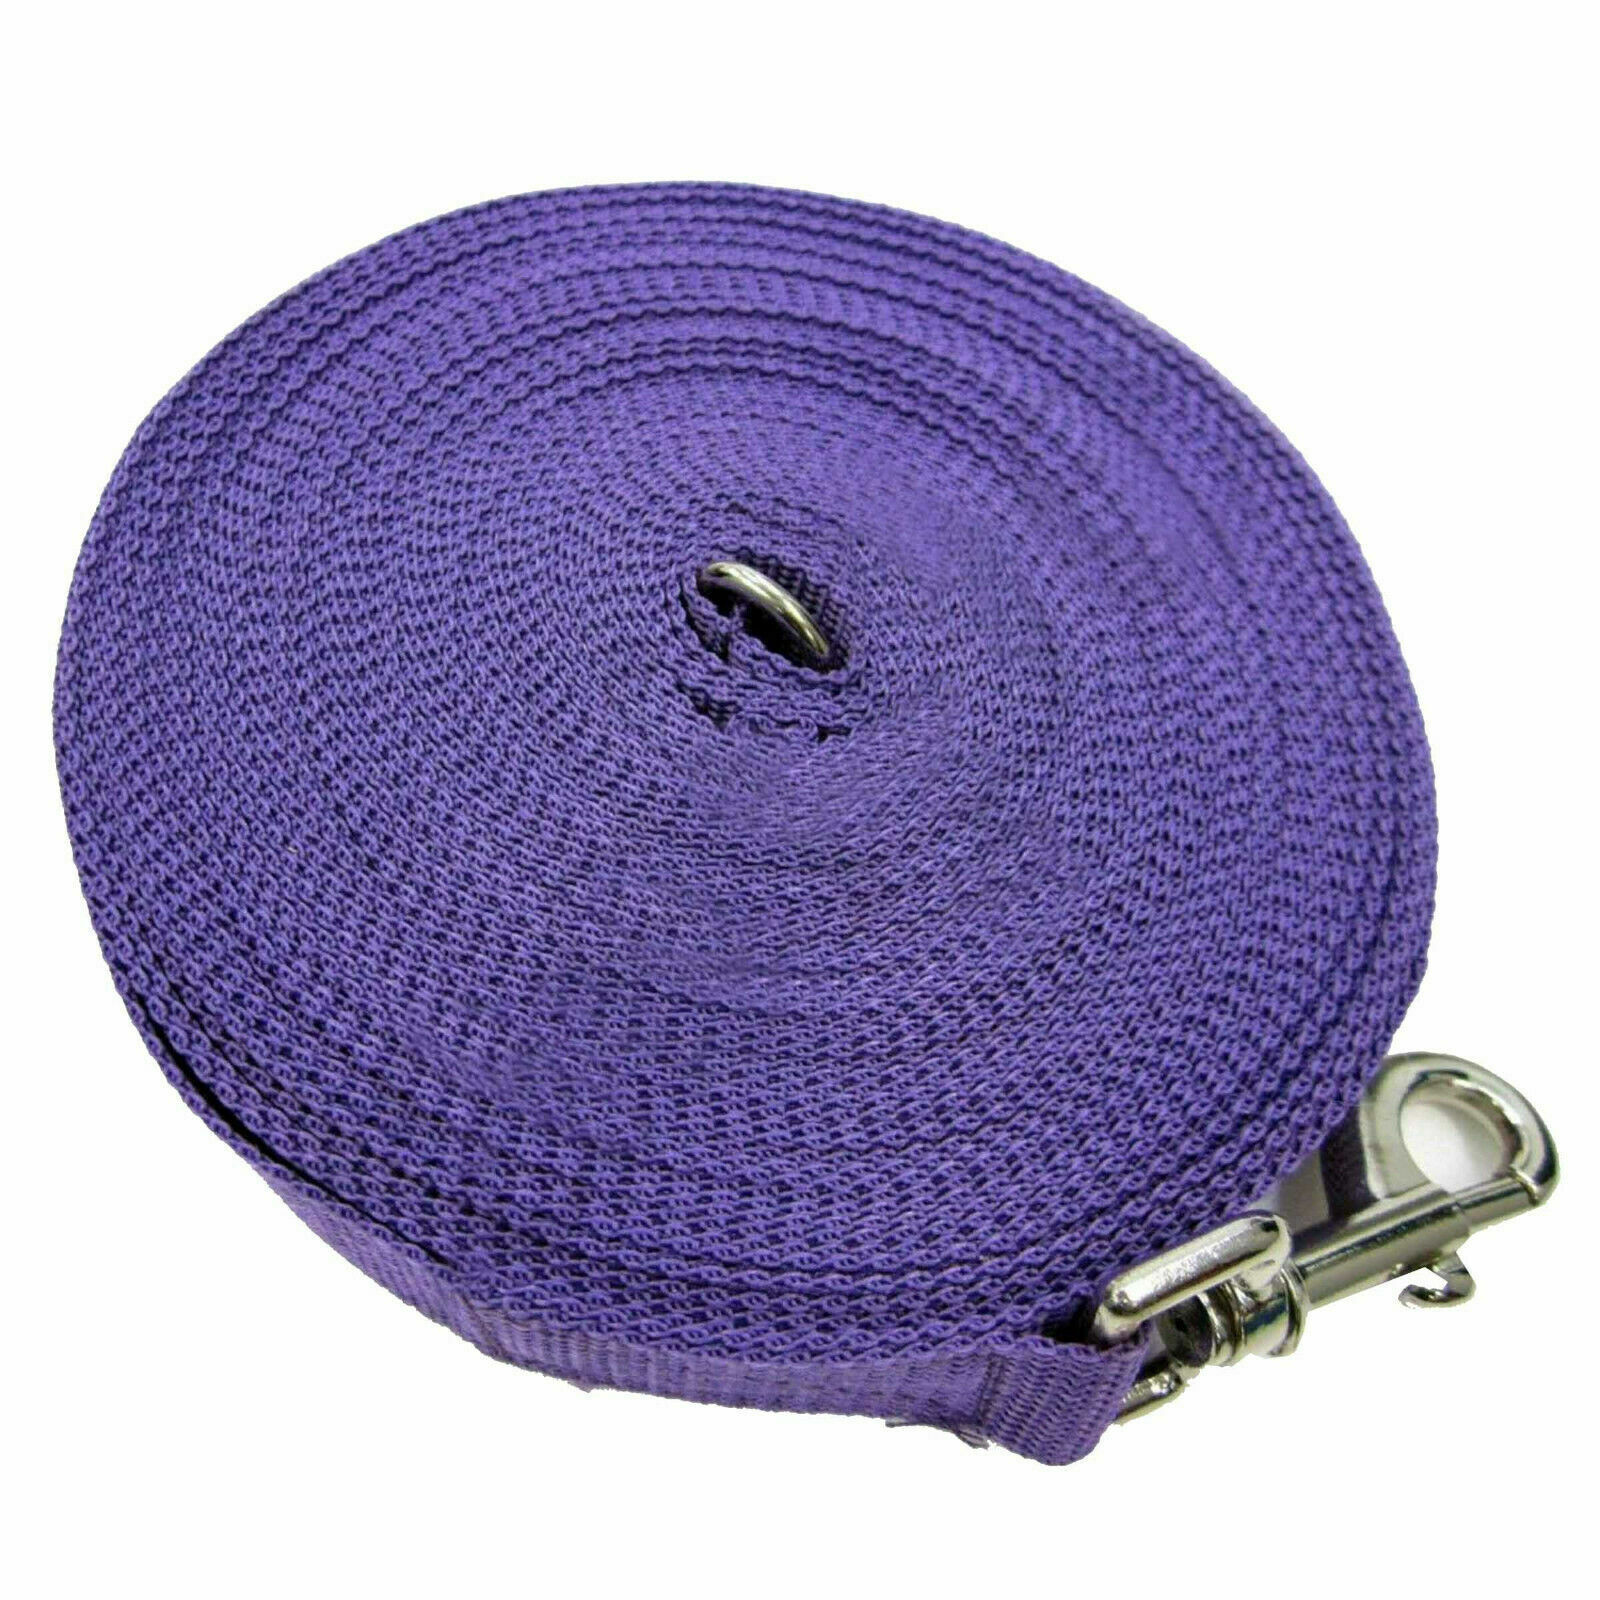 Purple Dog Pet Puppy Training Lead Leash 50ft 15m Long Obedience Recall 1 Inch Wide